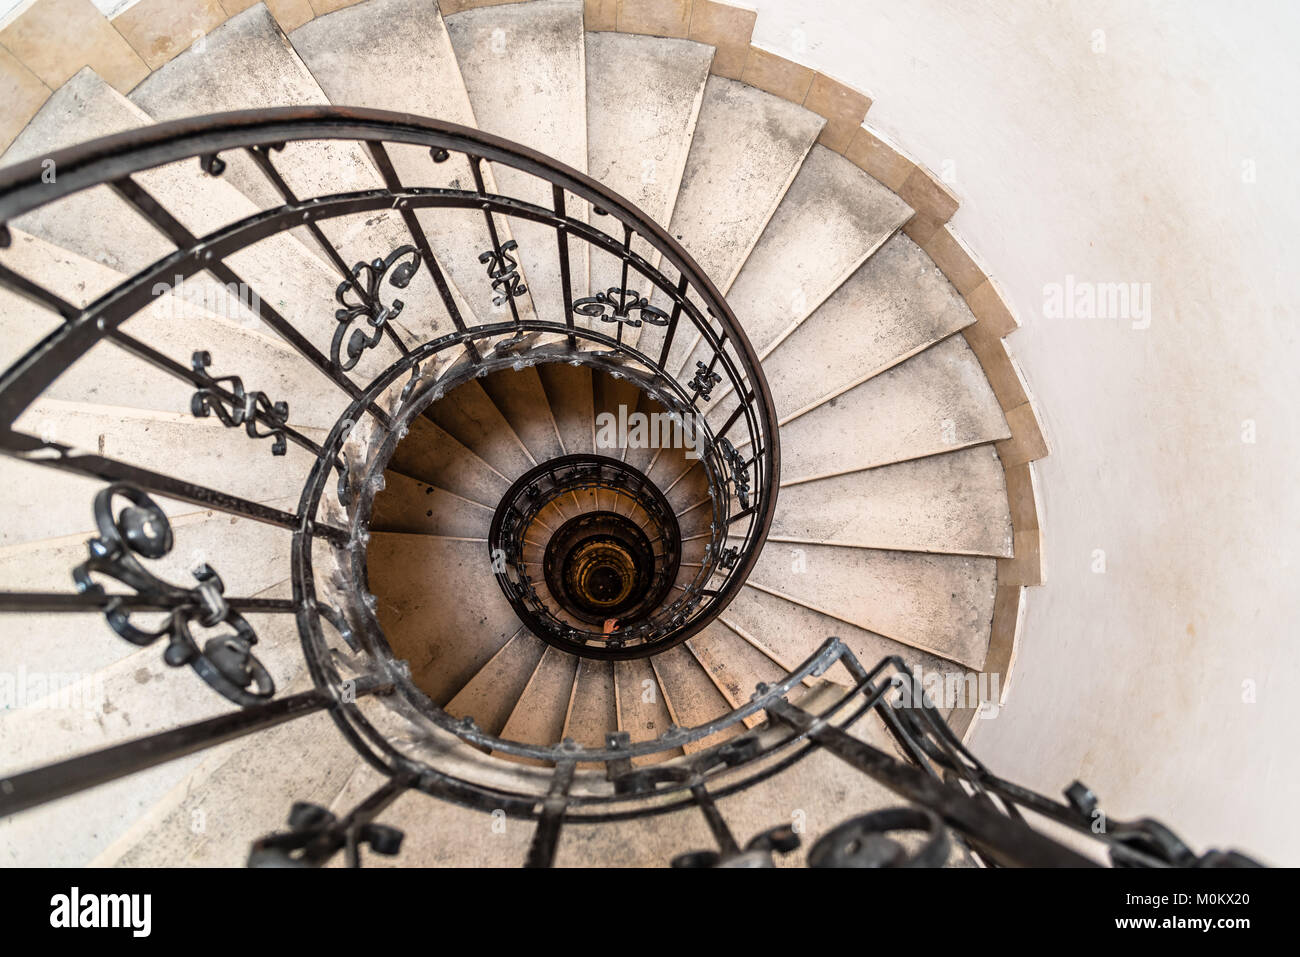 High angle view of spiral staircase with hand of man below. Stock Photo